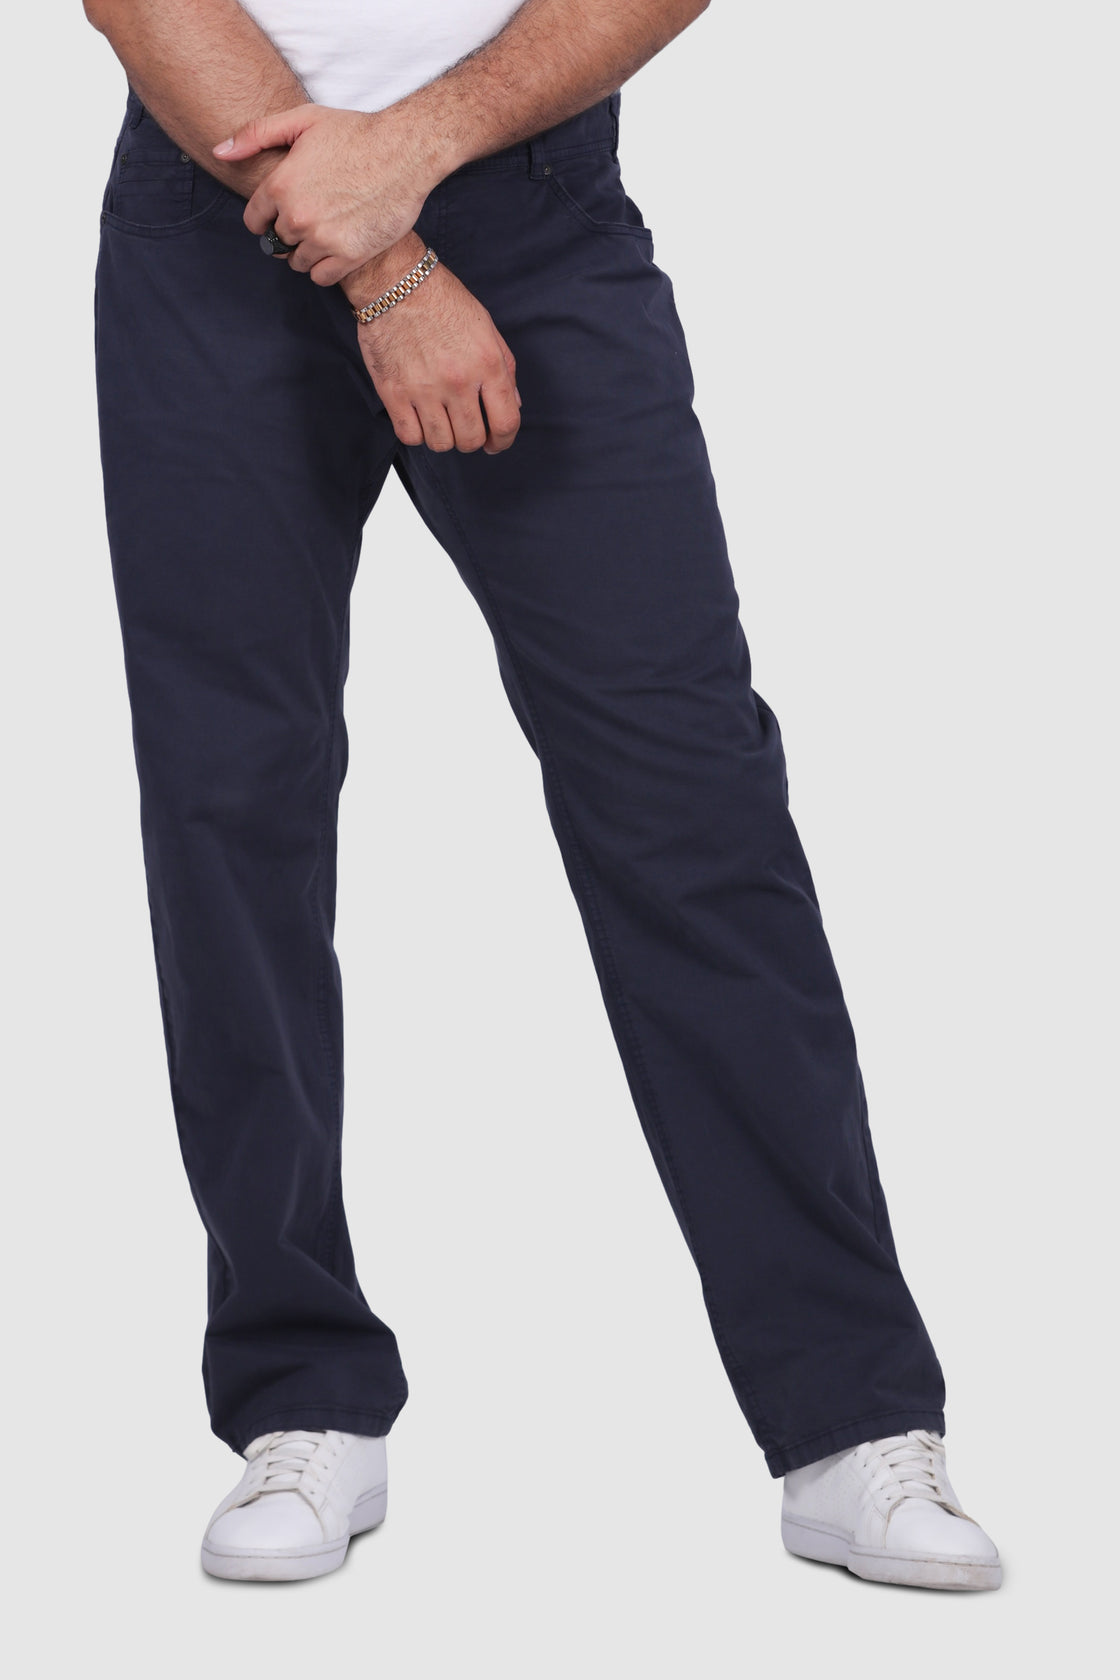 Dockers 5Pocket Cotton Stretch Trousers Otter at CareOfCarlcom